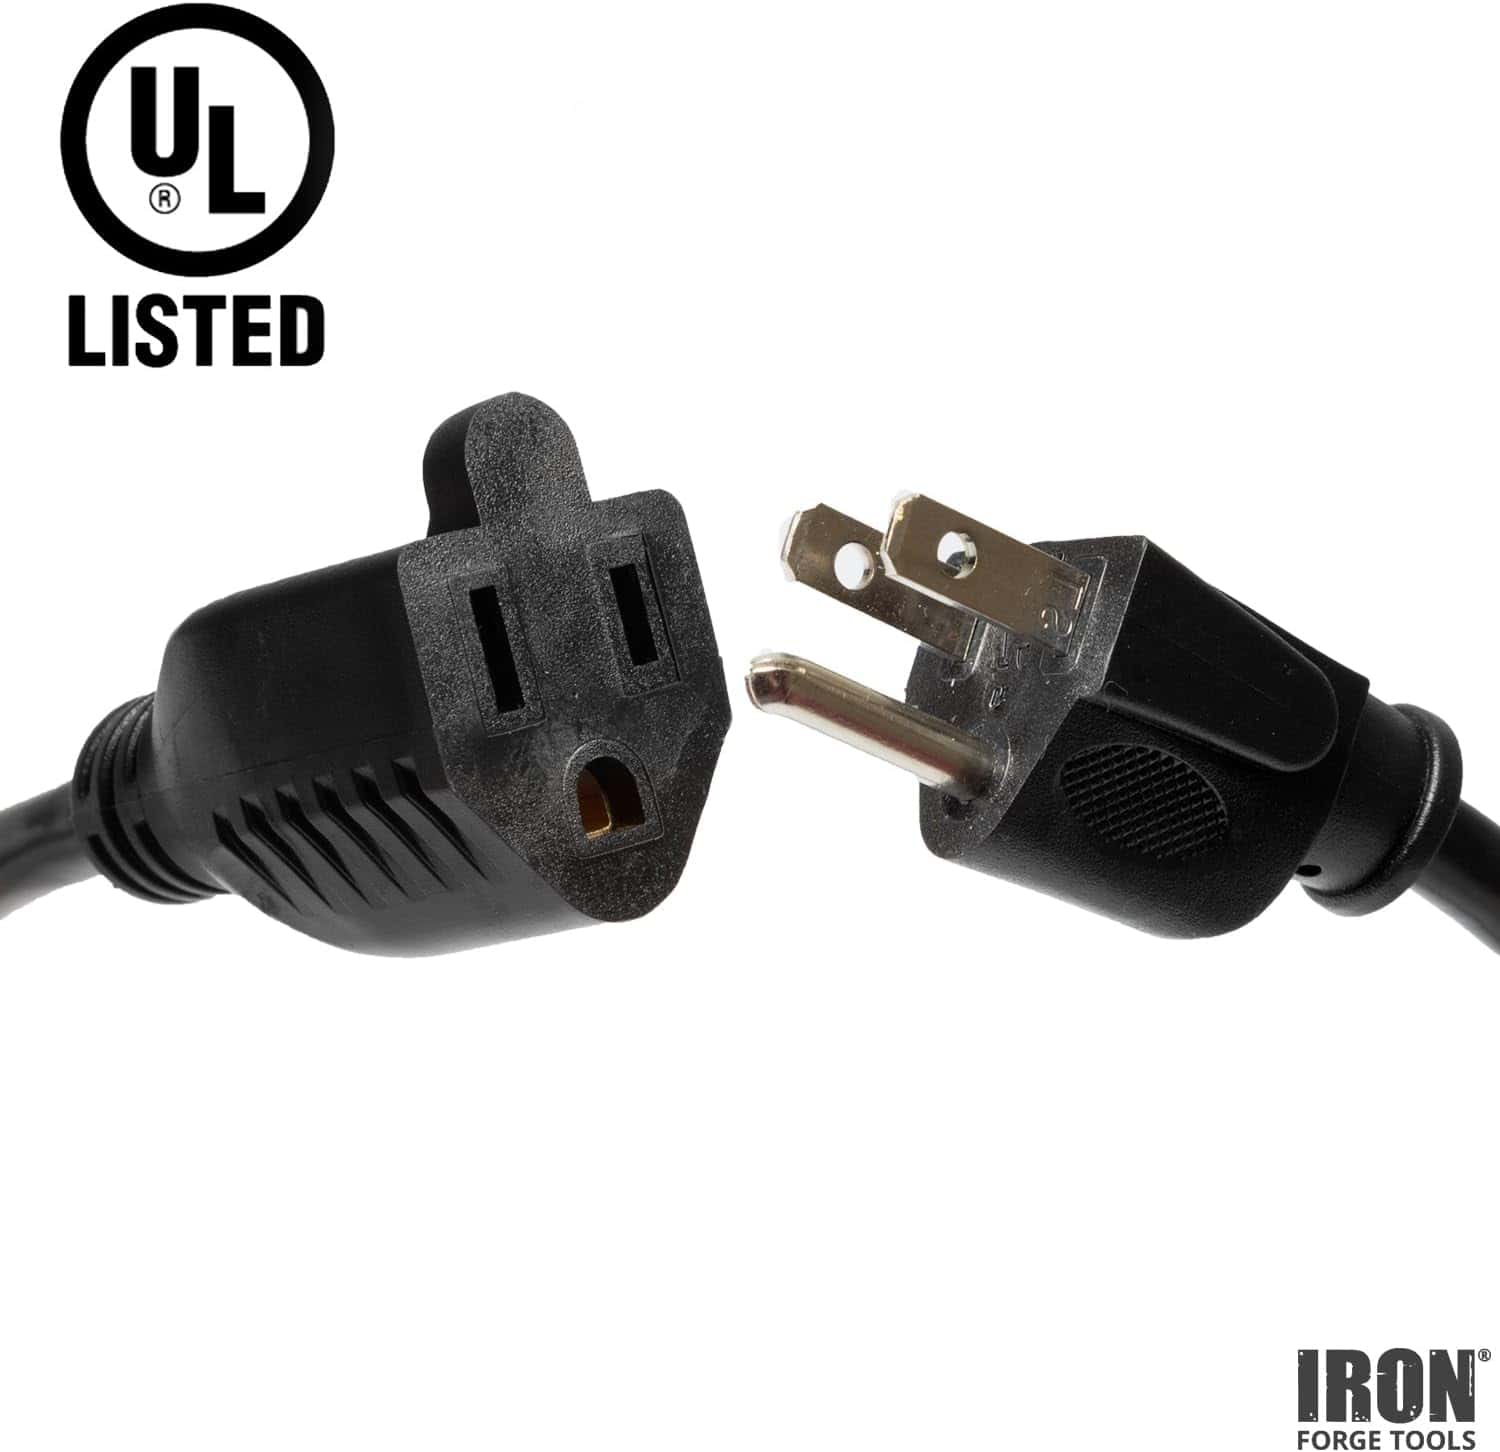 Iron Forge Cable 2 Pack Extension Cord 3 Feet 16 AWG 3 Foot Black Extension Cord Indoor Outdoor Use 3 Prong Multipack Weatherproof Exterior Extension Cord Great for Gardens Landscaping Lawn Mower 5